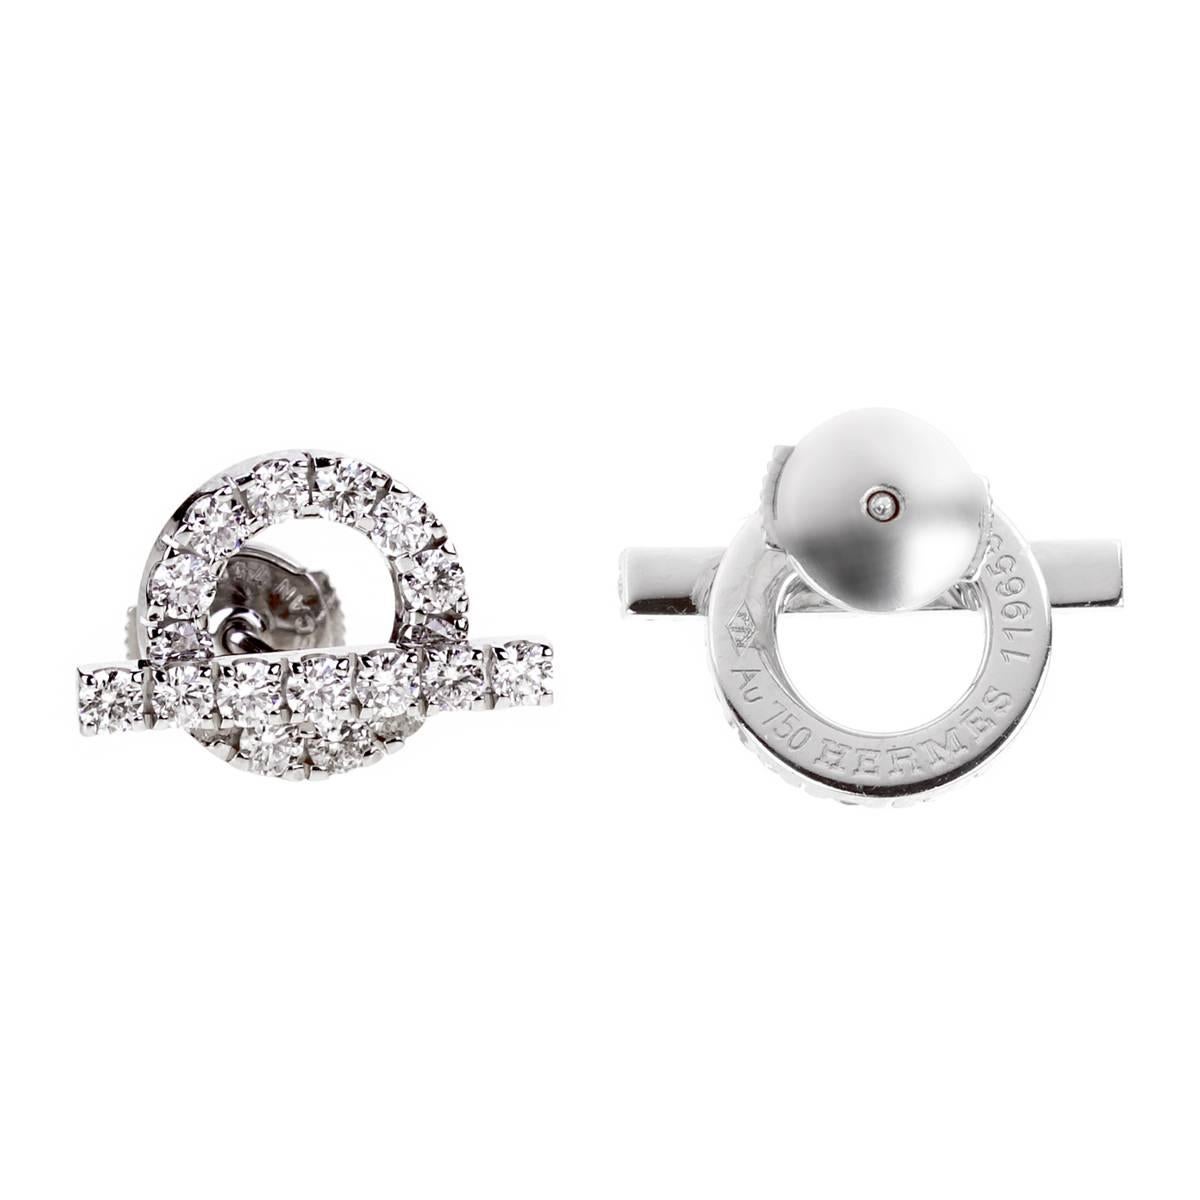 A stunning pair of Hermes earrings featuring 1.14 of the finest Vvs Hermes round brilliant cut diamonds in 18k white gold. The earrings measure .60